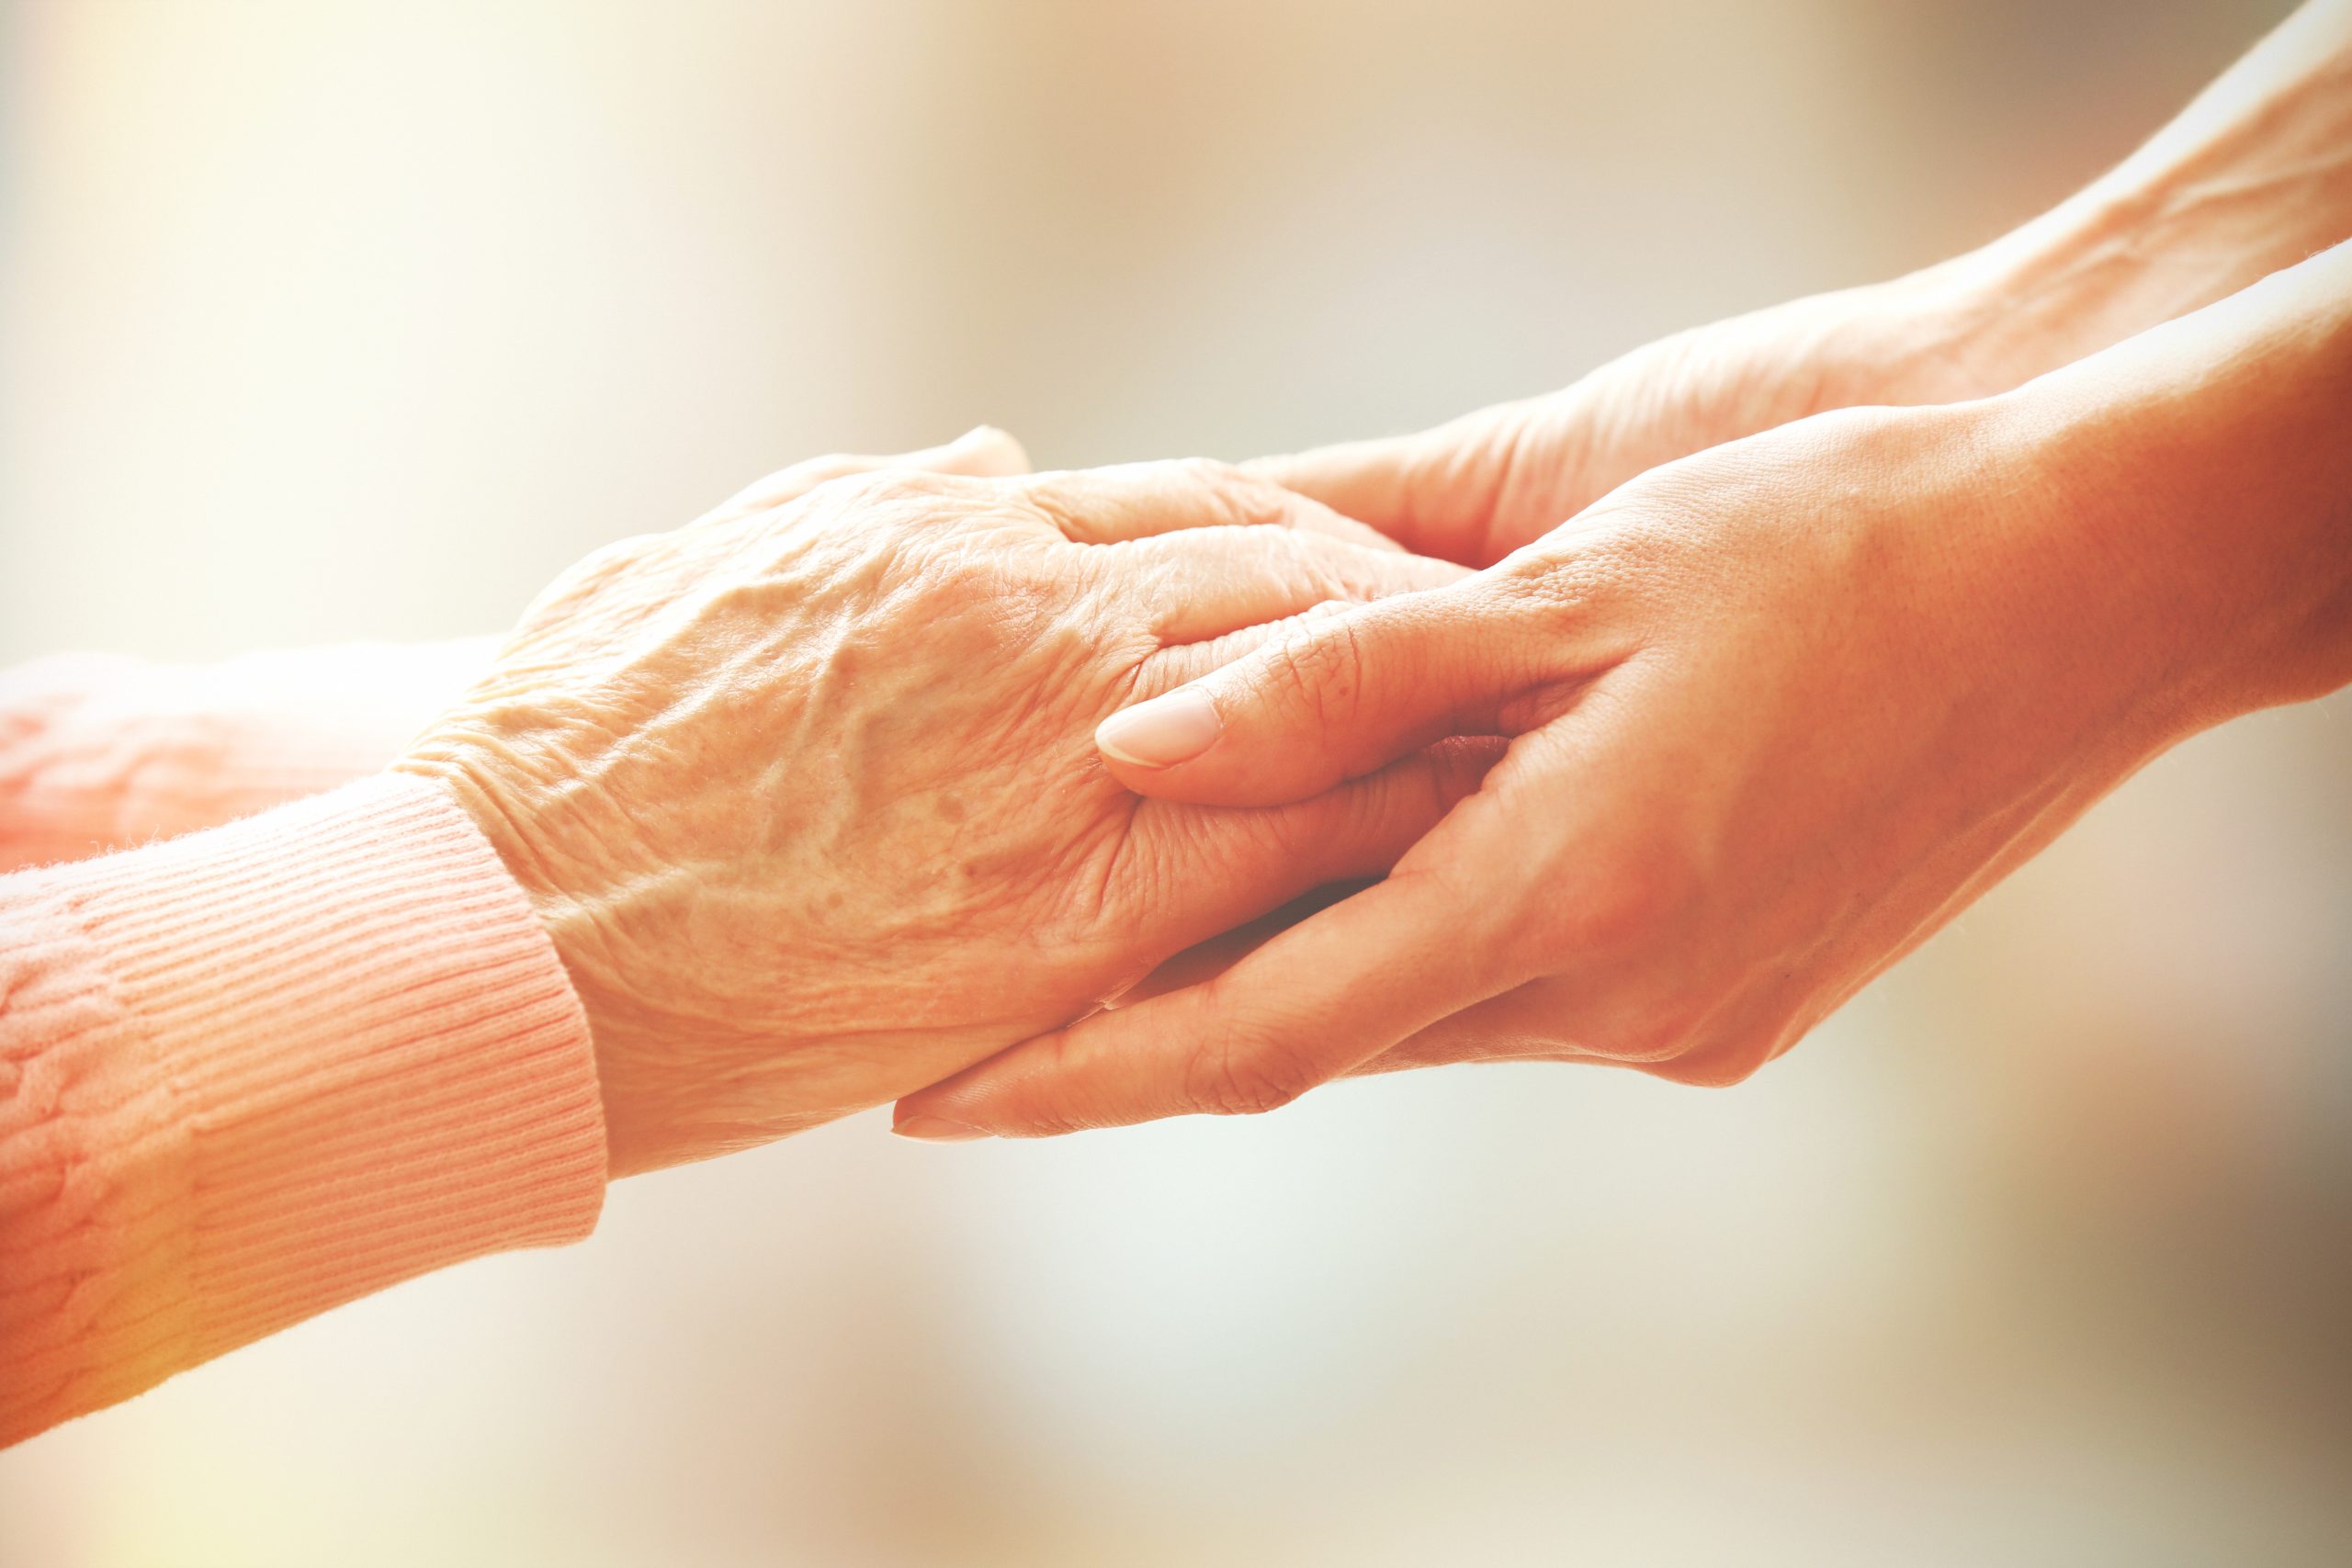 image of middle-aged hands gently holding a pair of elderly hands, symbolizing the care and support provided by families to aging loved ones with severe mental illness